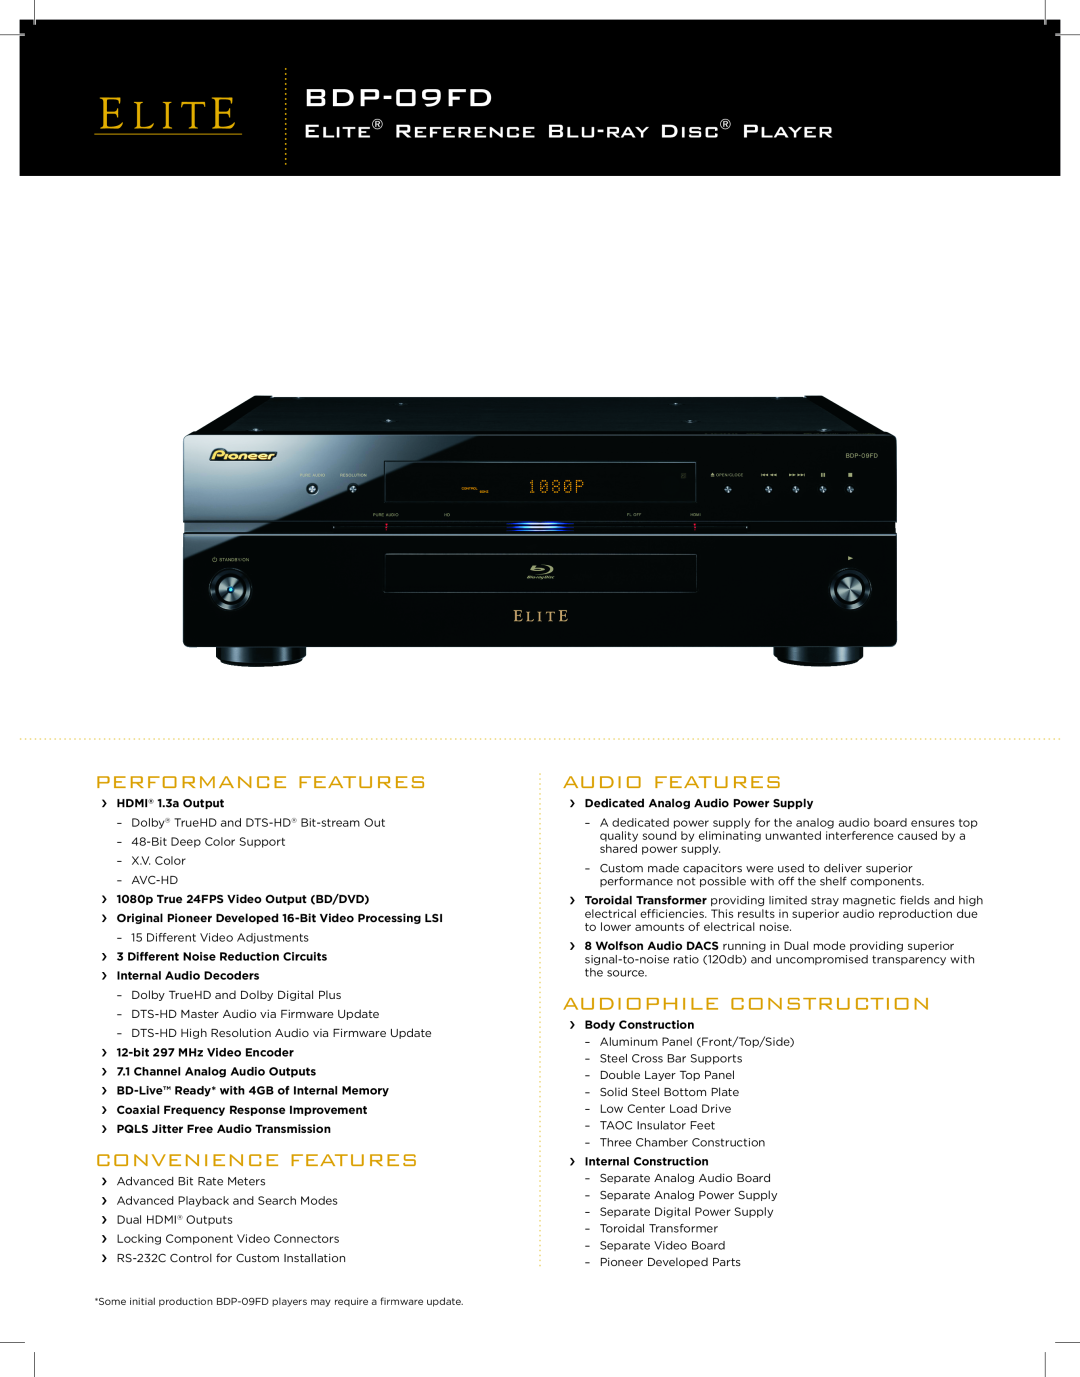 Elite BDP-09FD manual Elite Reference Blu-Ray Disc Player, Convenience Features, Audio Features, Audiophile Construction 